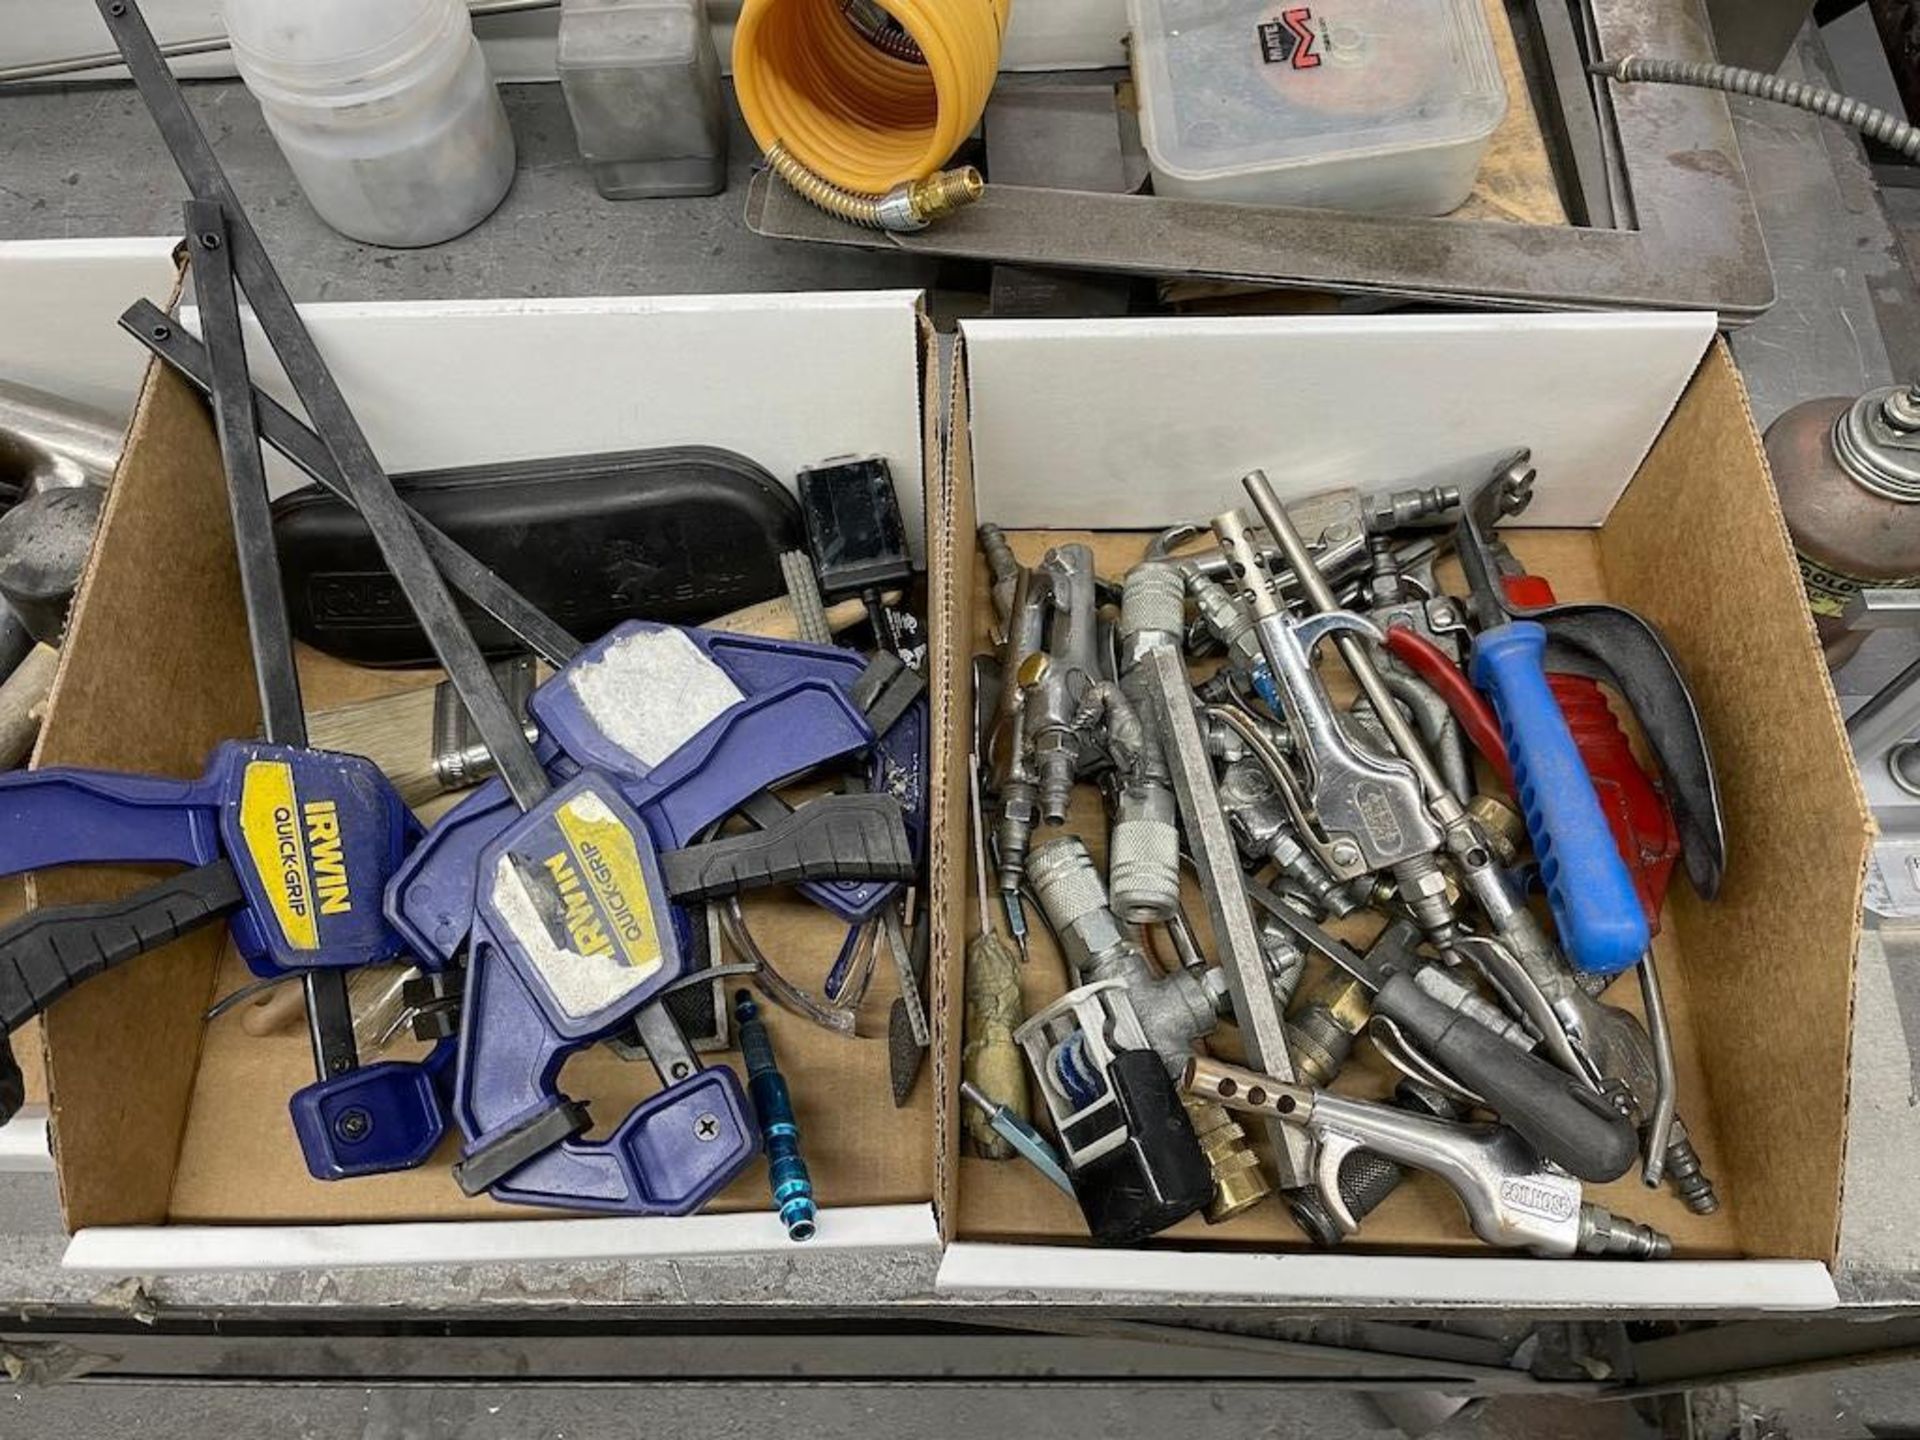 ASSORTED HAND TOOLS, PNEUMATIC, GLOVES, TAPE DISPENSERS, HEIGHT GAUGE, PLUNGER CANS, W 3 HD STEEL - Image 2 of 16